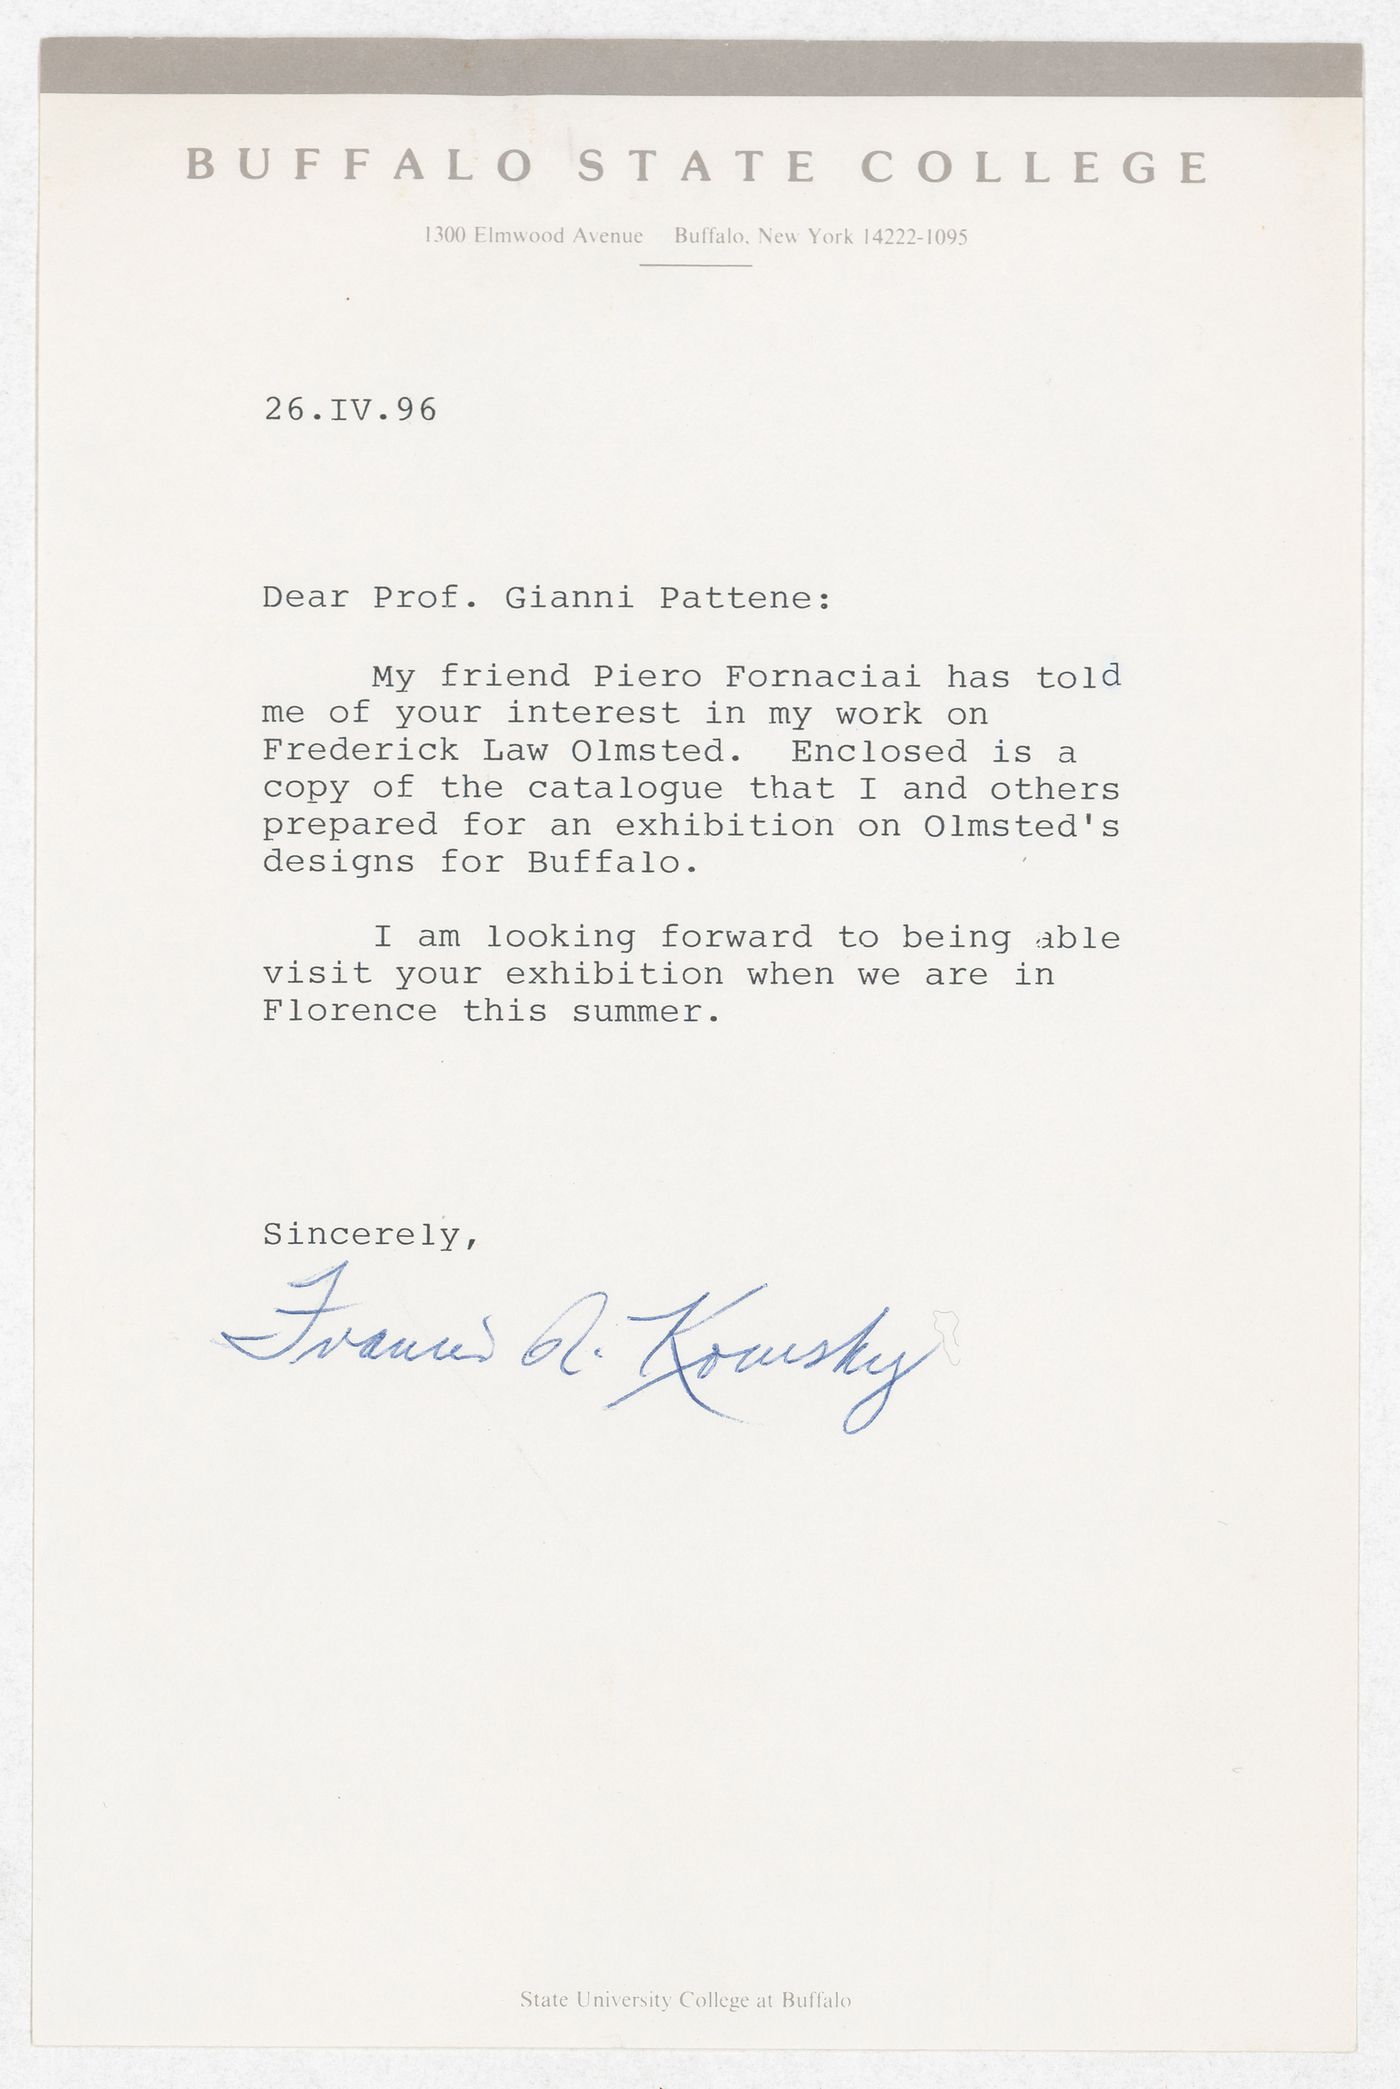 Correspondence with Francis R. Kowsky at Buffalo State College for the exhibition Olmsted: L'origine del parco urbano e del parco naturale contemporaneo